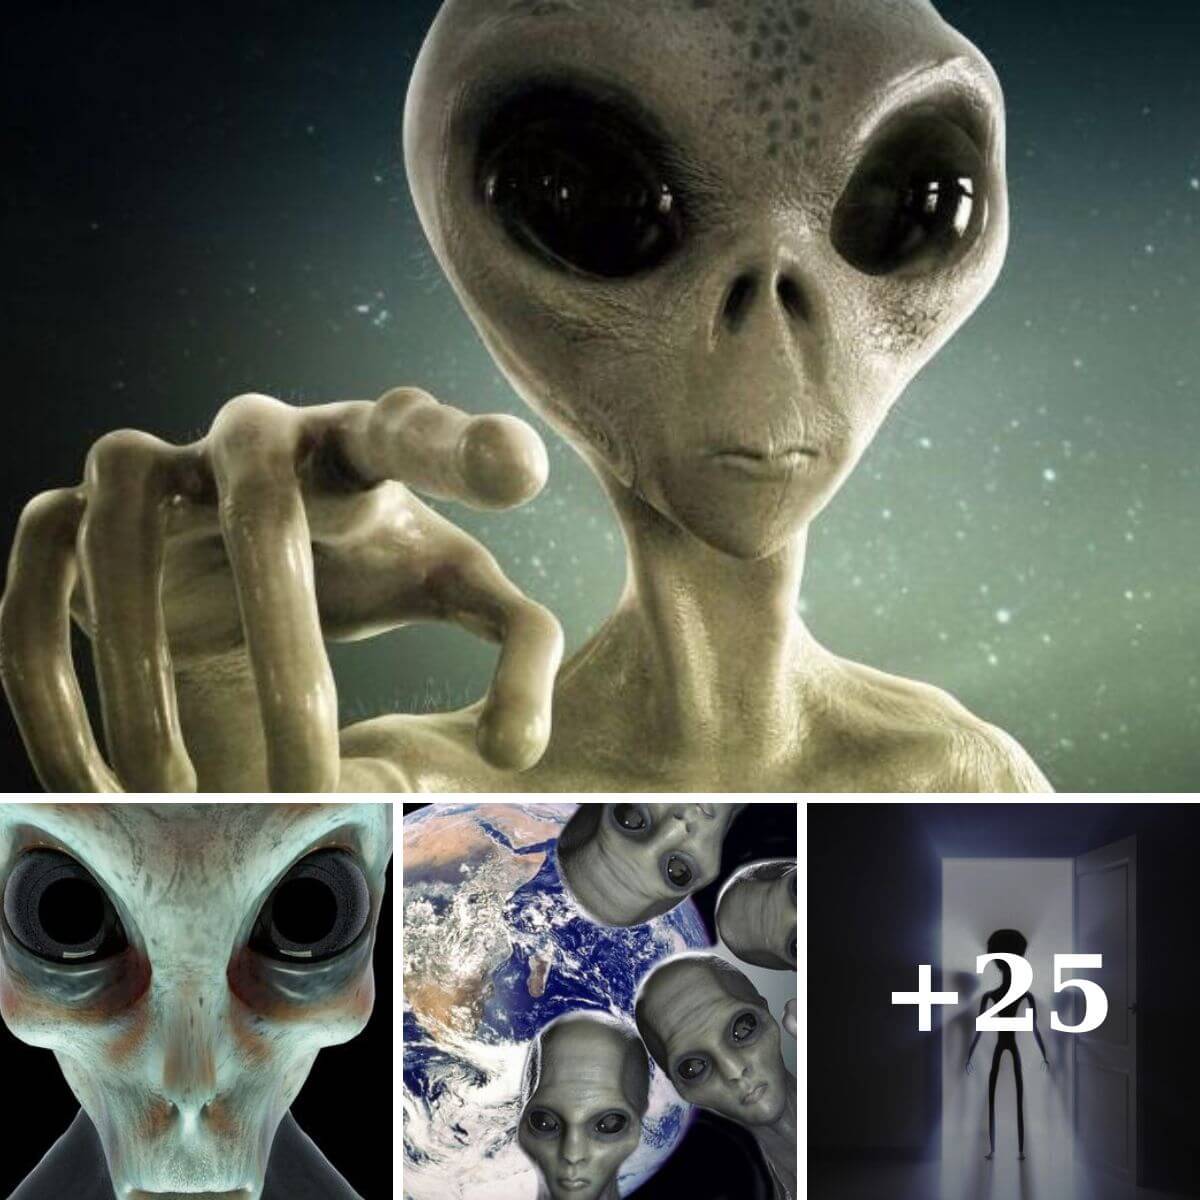 Are Aliens Impersonating Us to Live Among Humans?